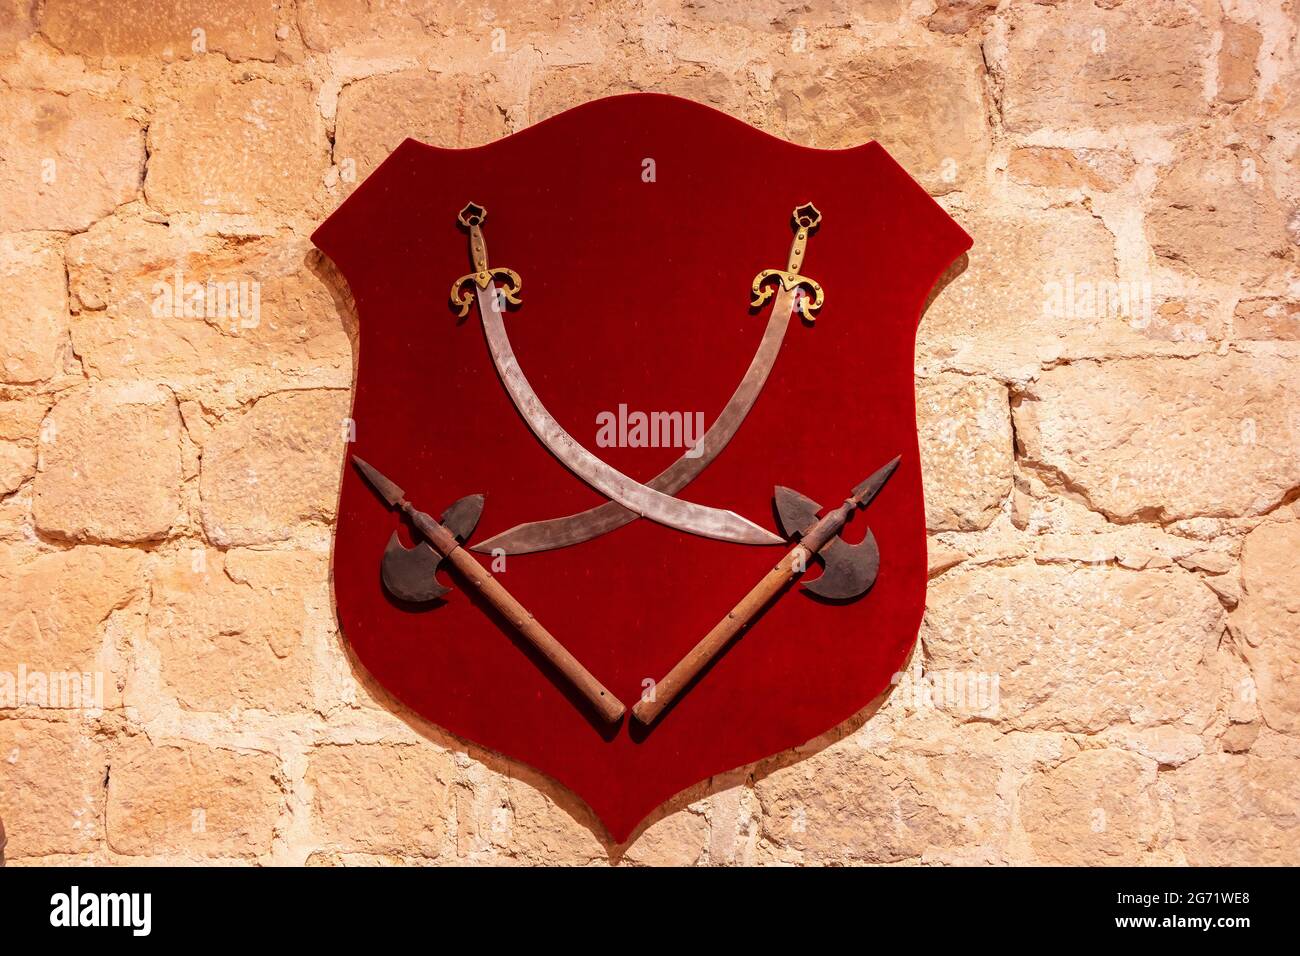 Swords and axes hung on the wall on a red velvet shield Stock Photo